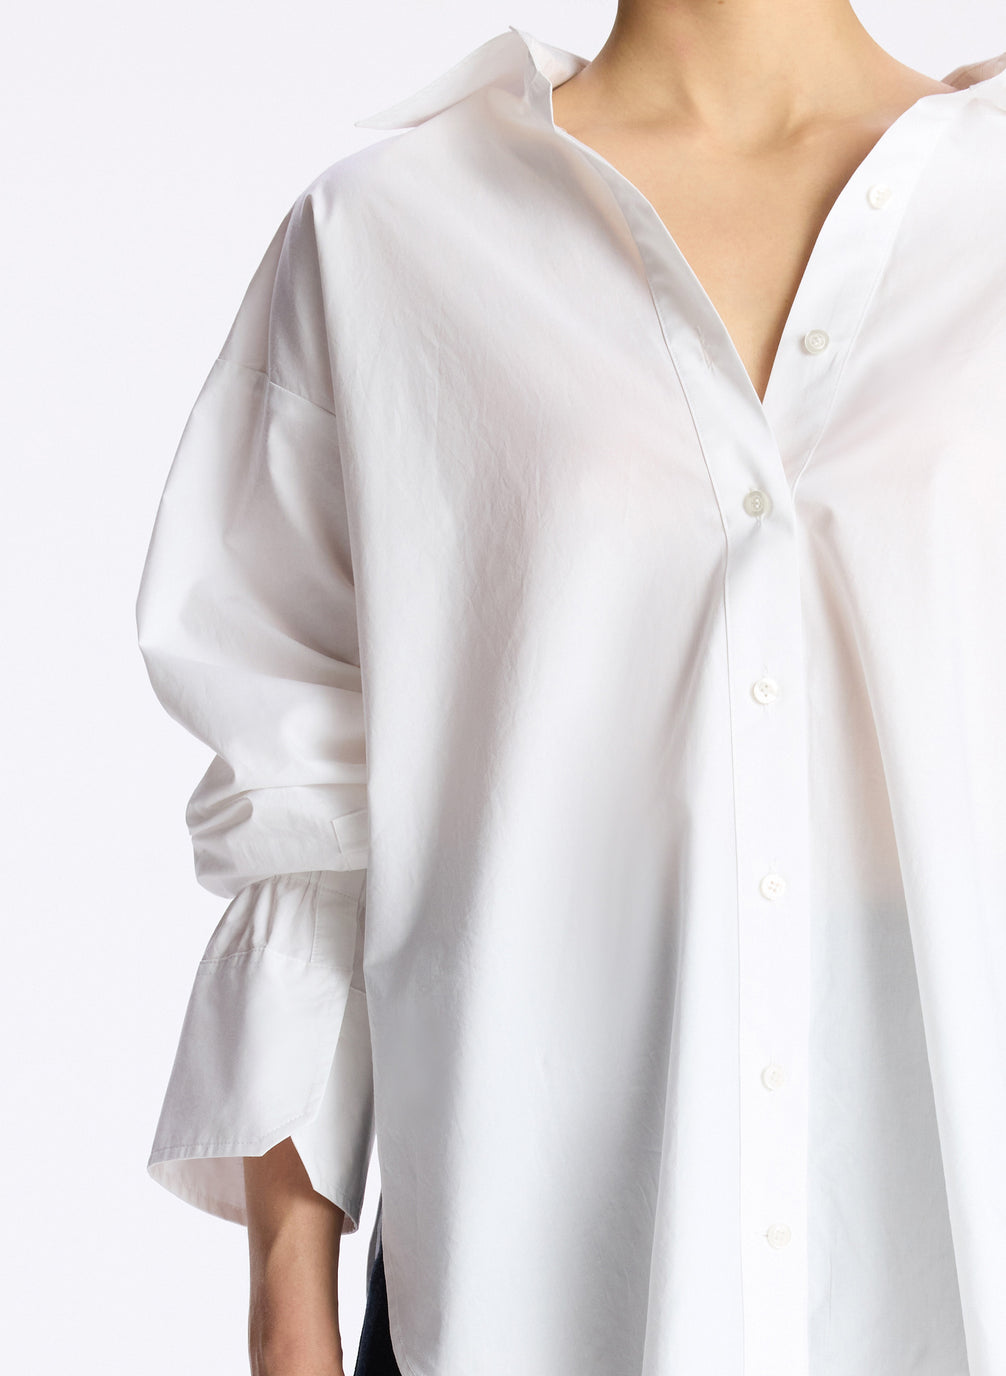 detail view of woman wearing white oversized button down shirt and dark wash denim jeans